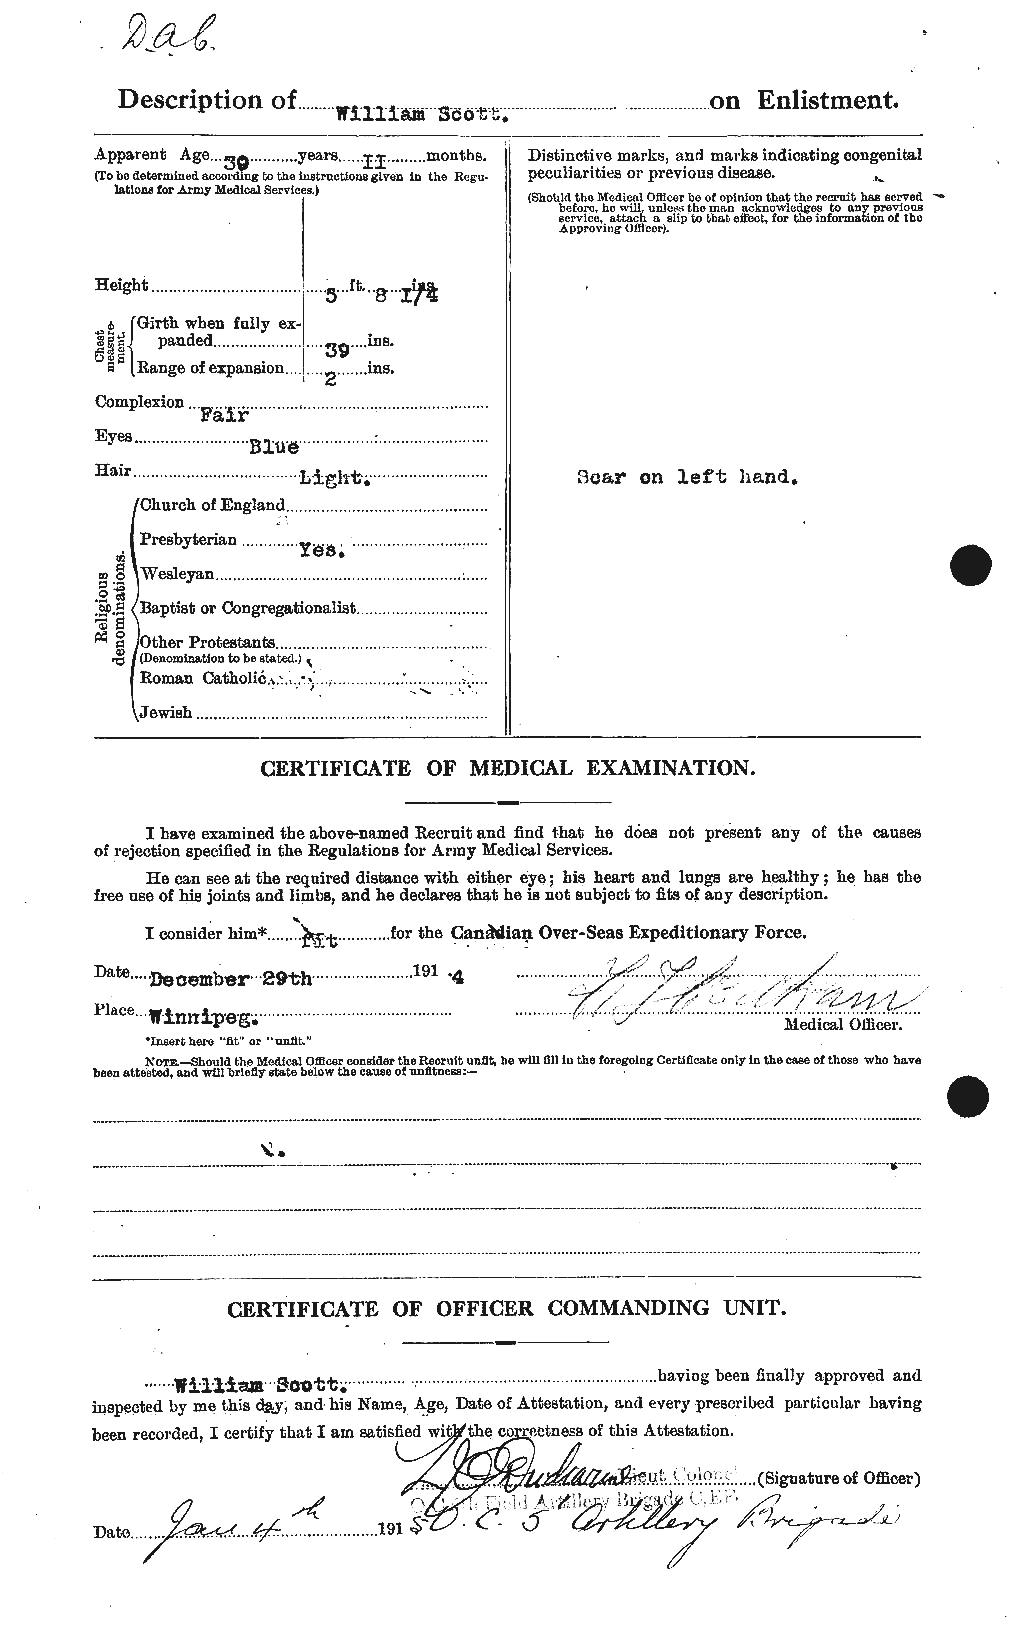 Personnel Records of the First World War - CEF 619899b